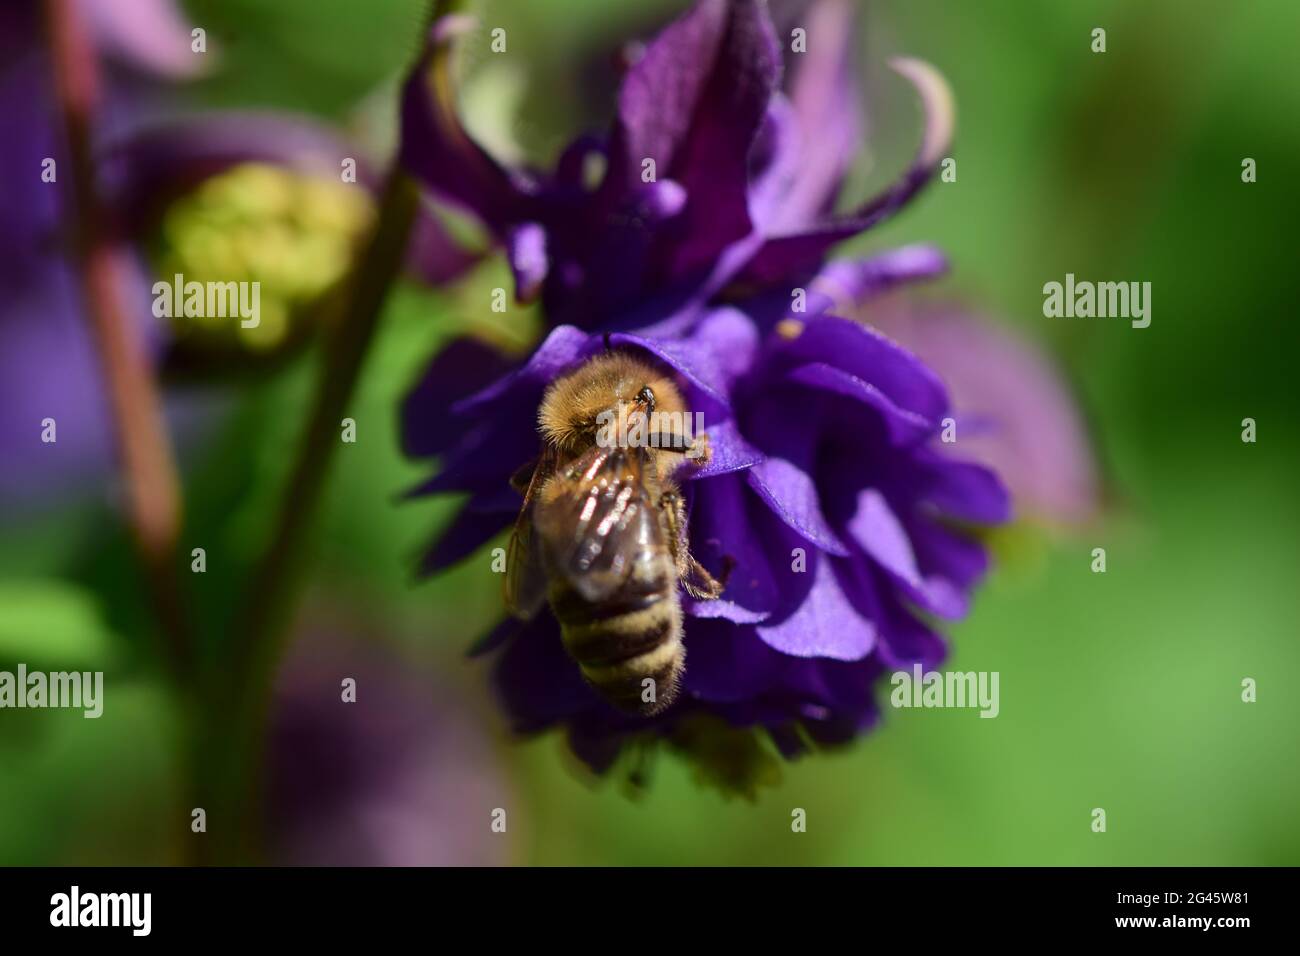 closeup of a honey bee on a purple flower against a blurred green background Stock Photo